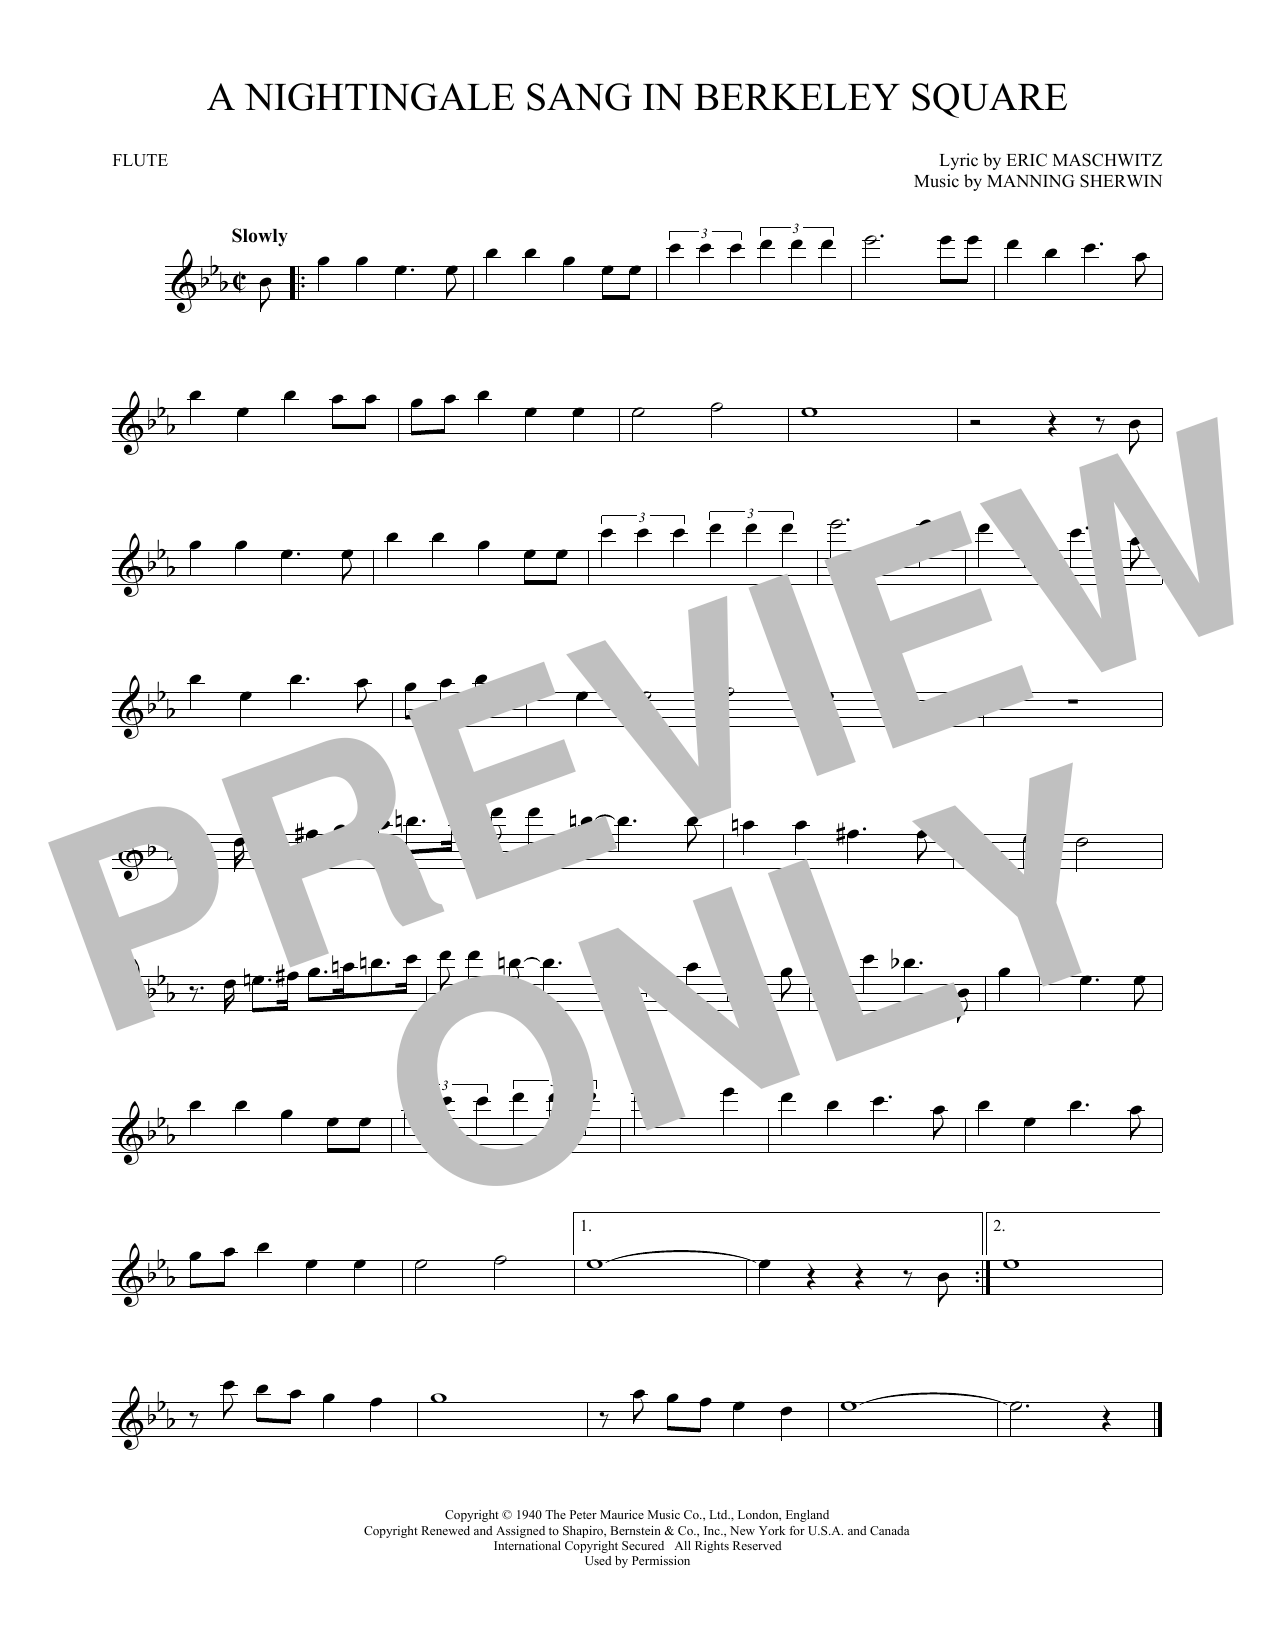 A Nightingale Sang In Berkeley Square (Flute Solo) von Manning Sherwin